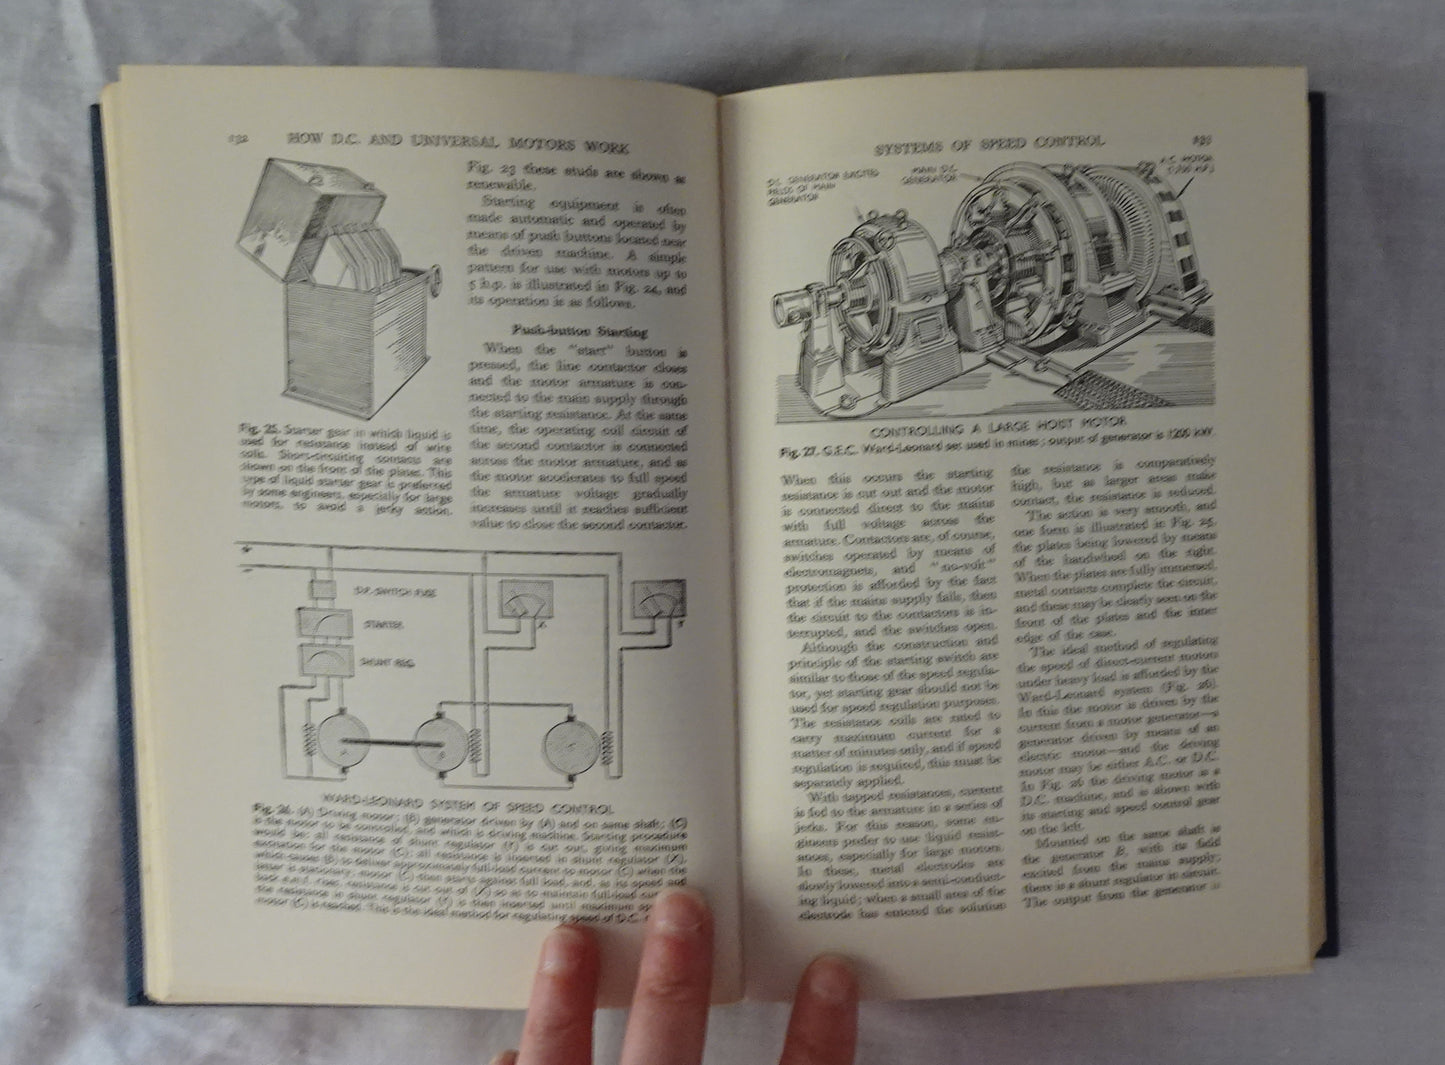 Principles of Electricity Illustrated by Roy C. Norris